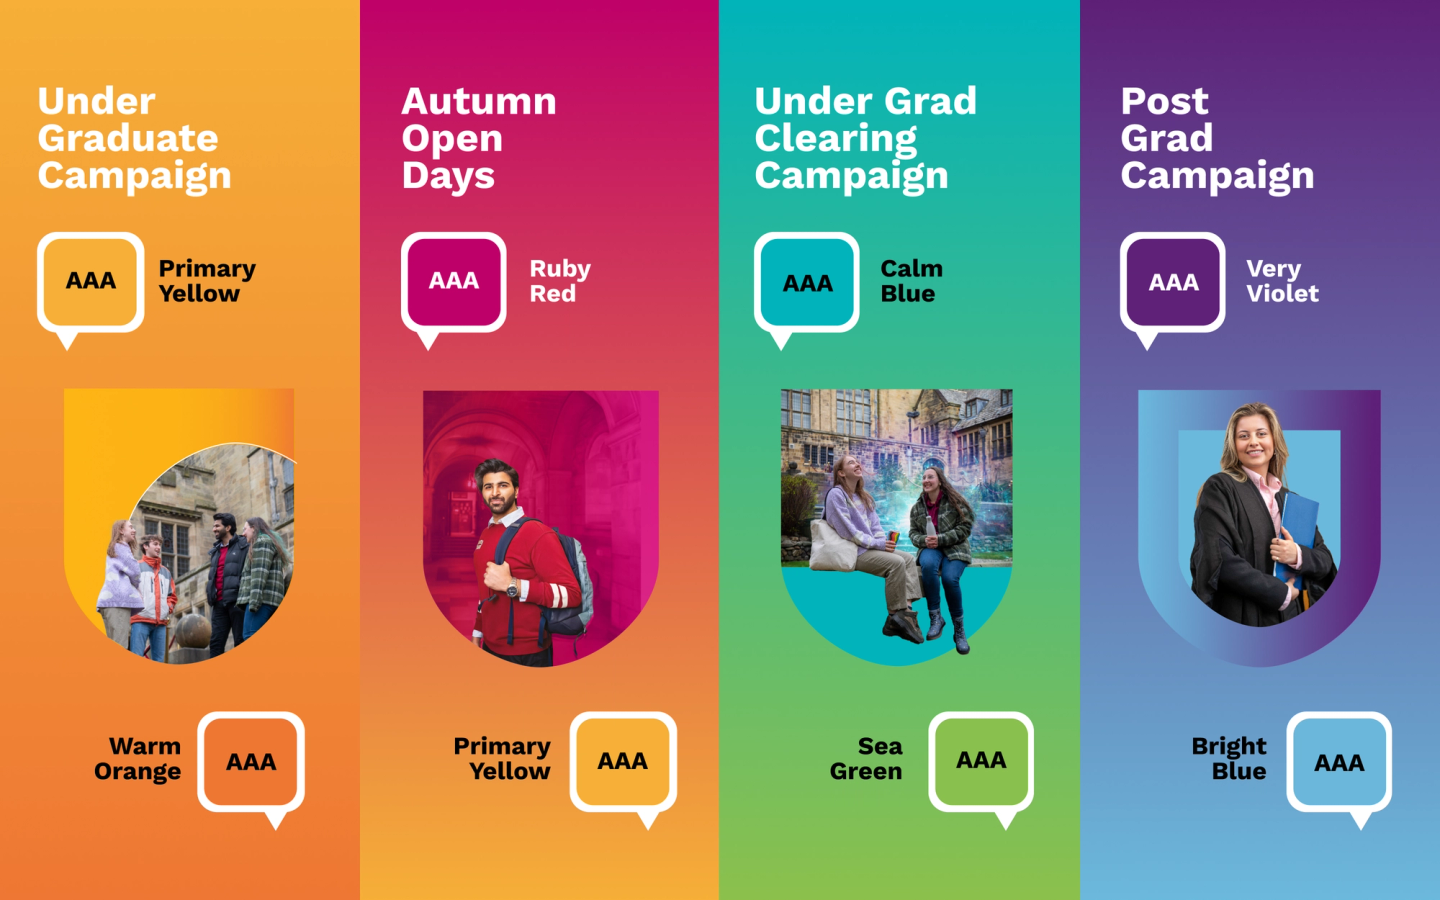 Four colourful banners representing different university campaigns, each featuring smiling students and color-code for undergraduate, autumn open days, clearing, and postgraduate programs.